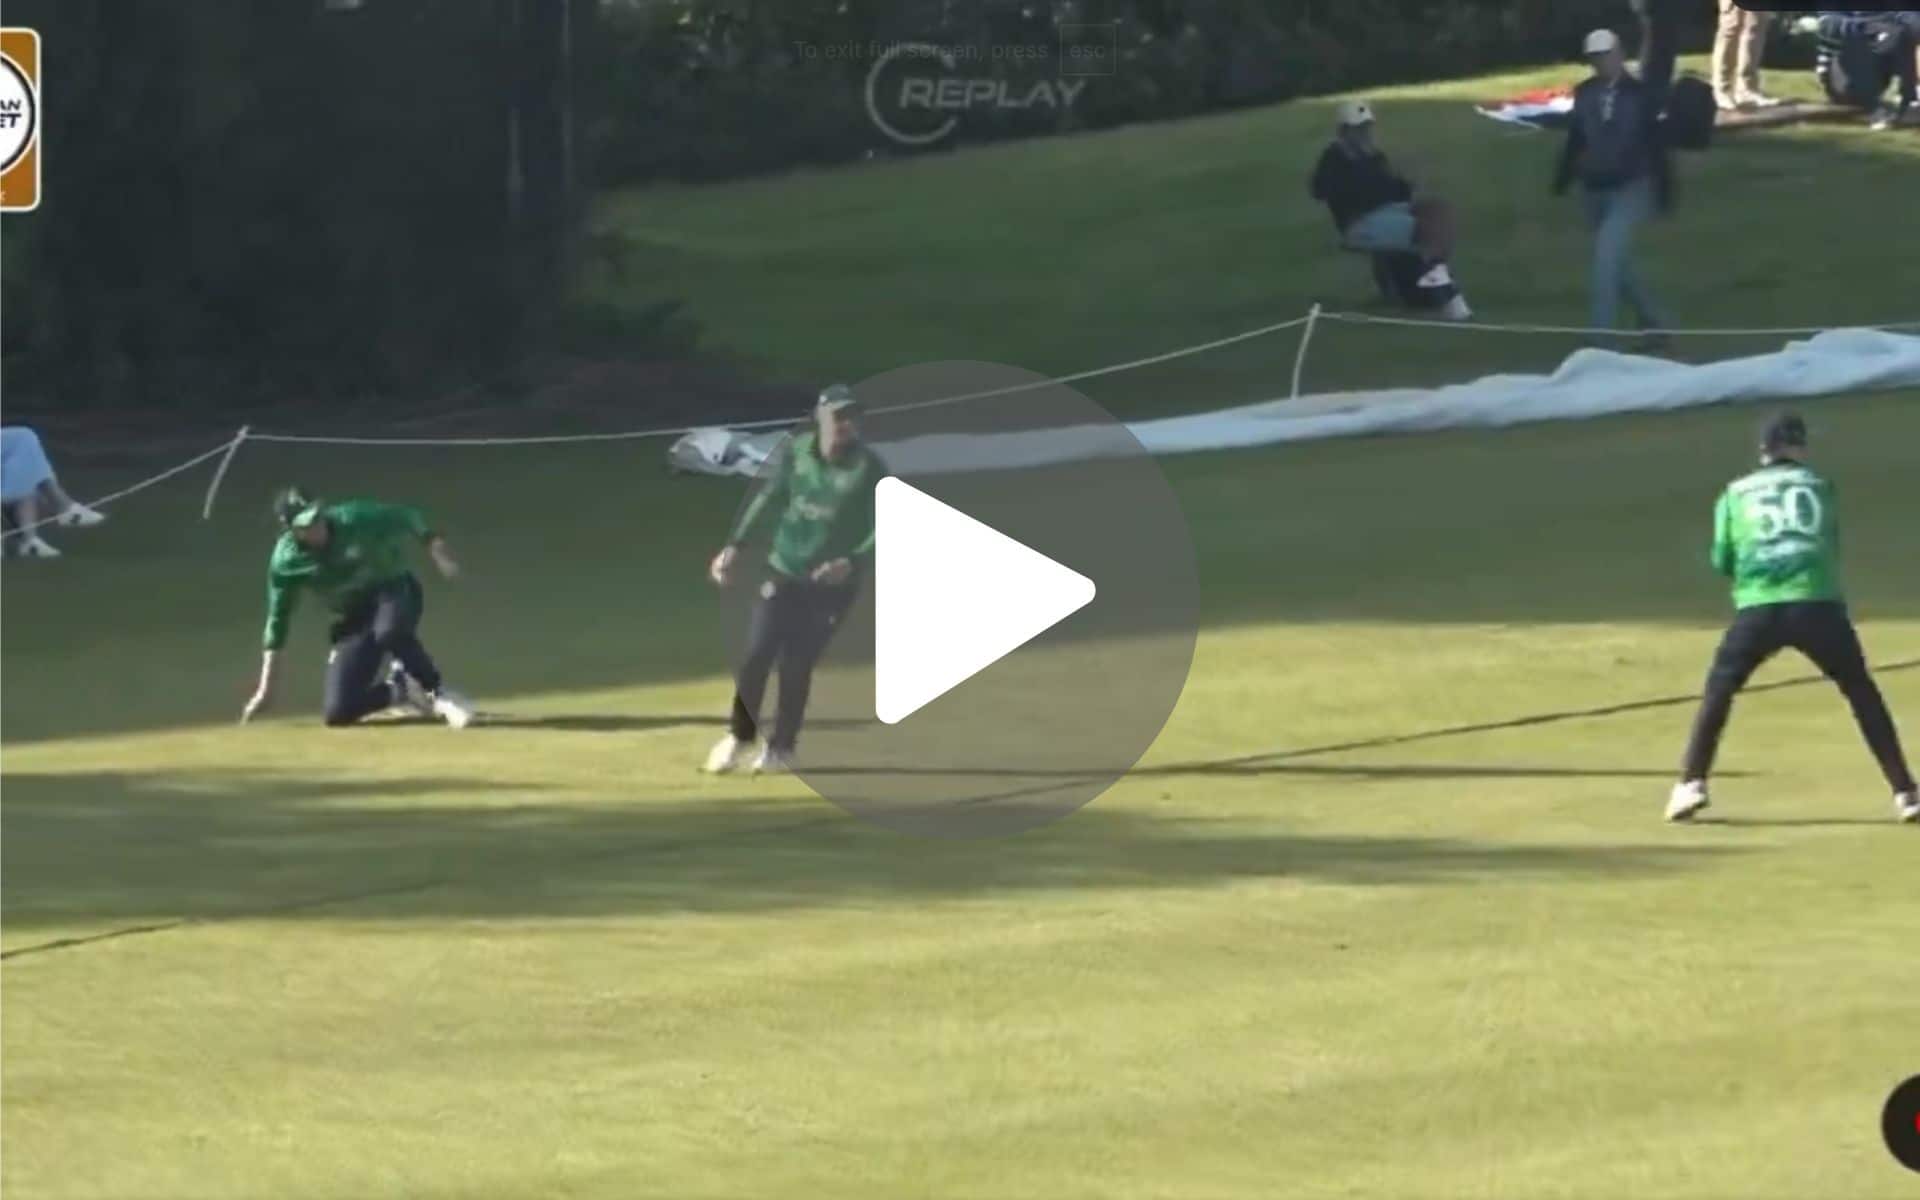 [Watch] Tector, Delany, Dockrell Save A Certain Boundary In A Never ...